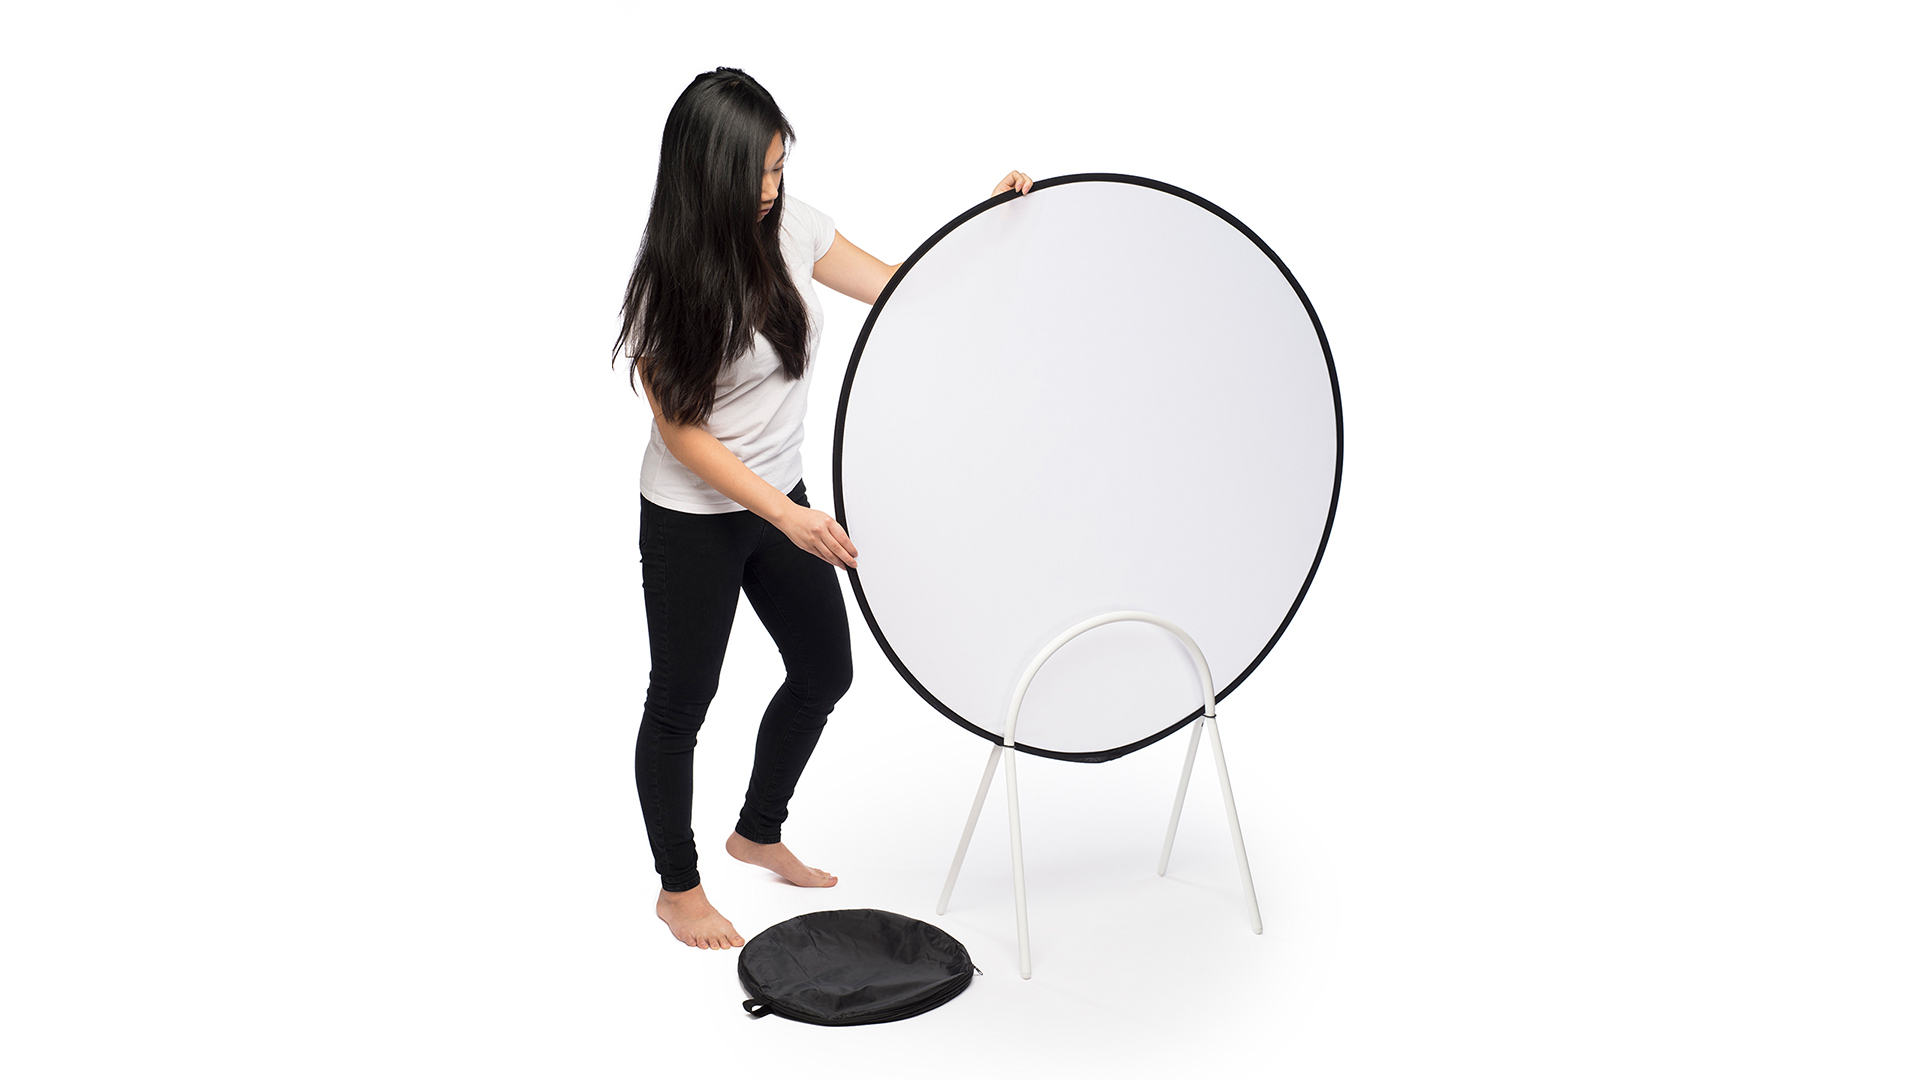 Someone placing white cylindrical space separator into stand with round black bag unzipped on floor